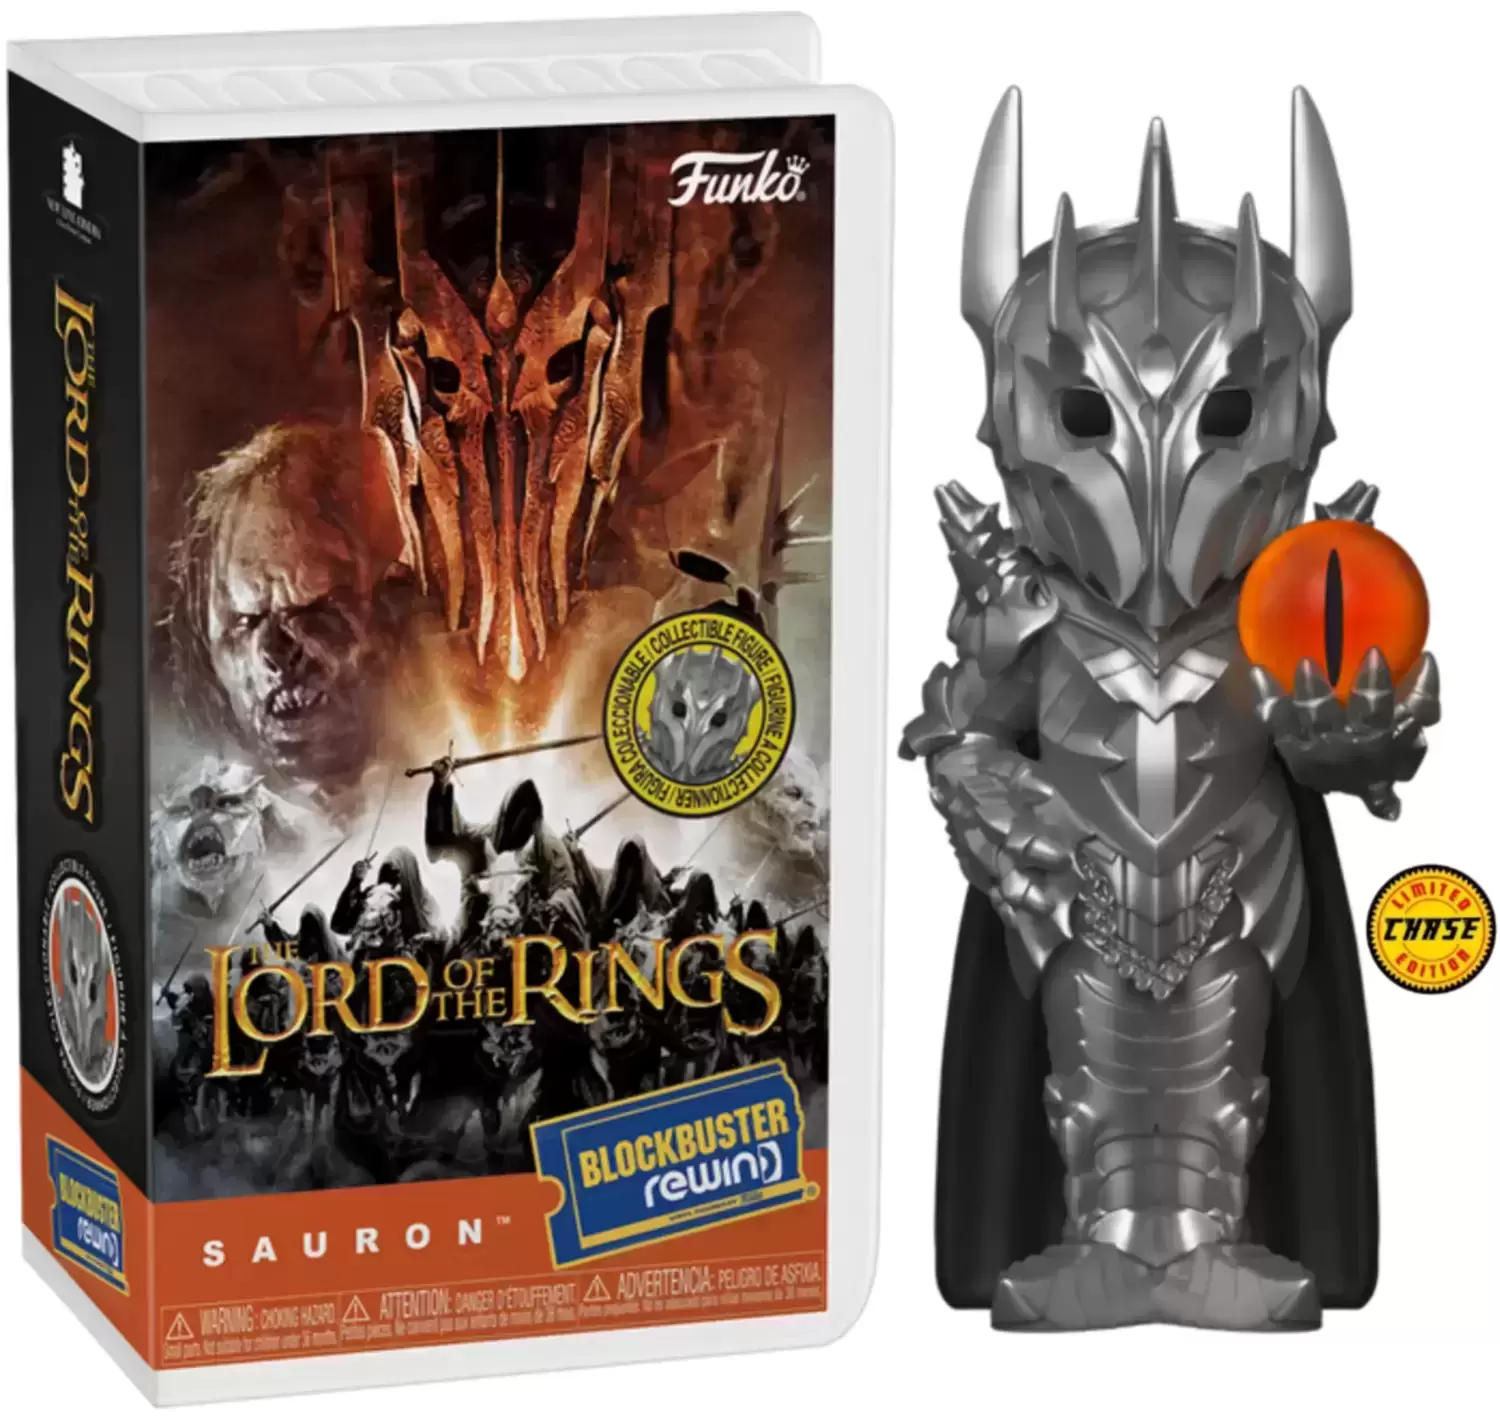 Blockbuster Rewind - Lord of The Rings - Sauron Chase